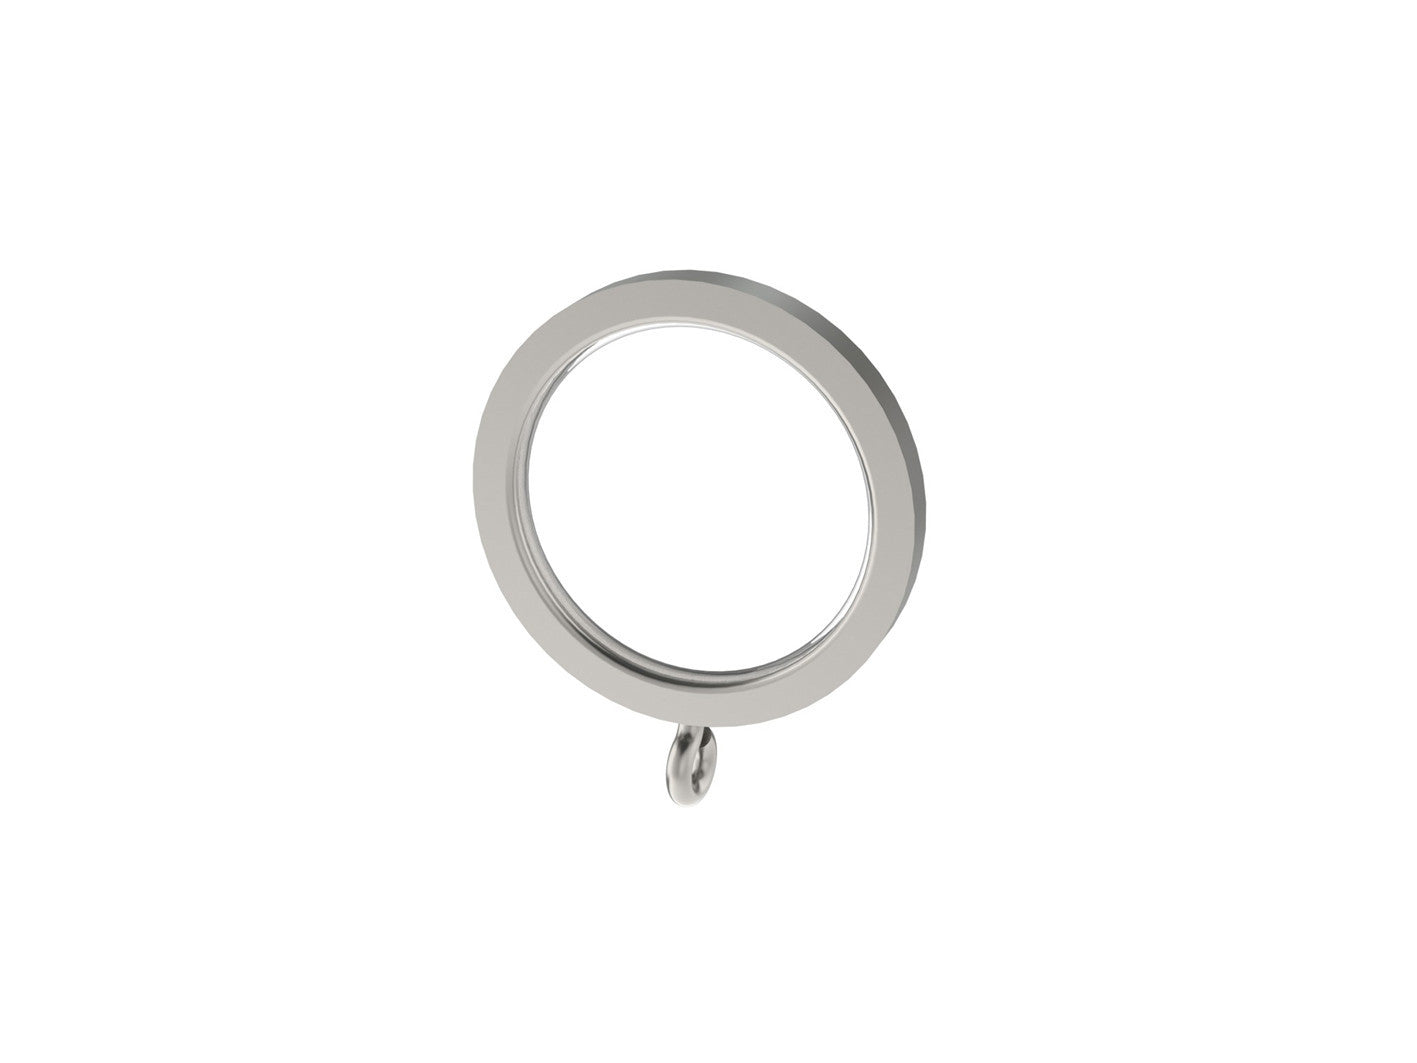 Stainless steel 30mm flat section curtain ring for 30mm stainless steel curtain pole sets